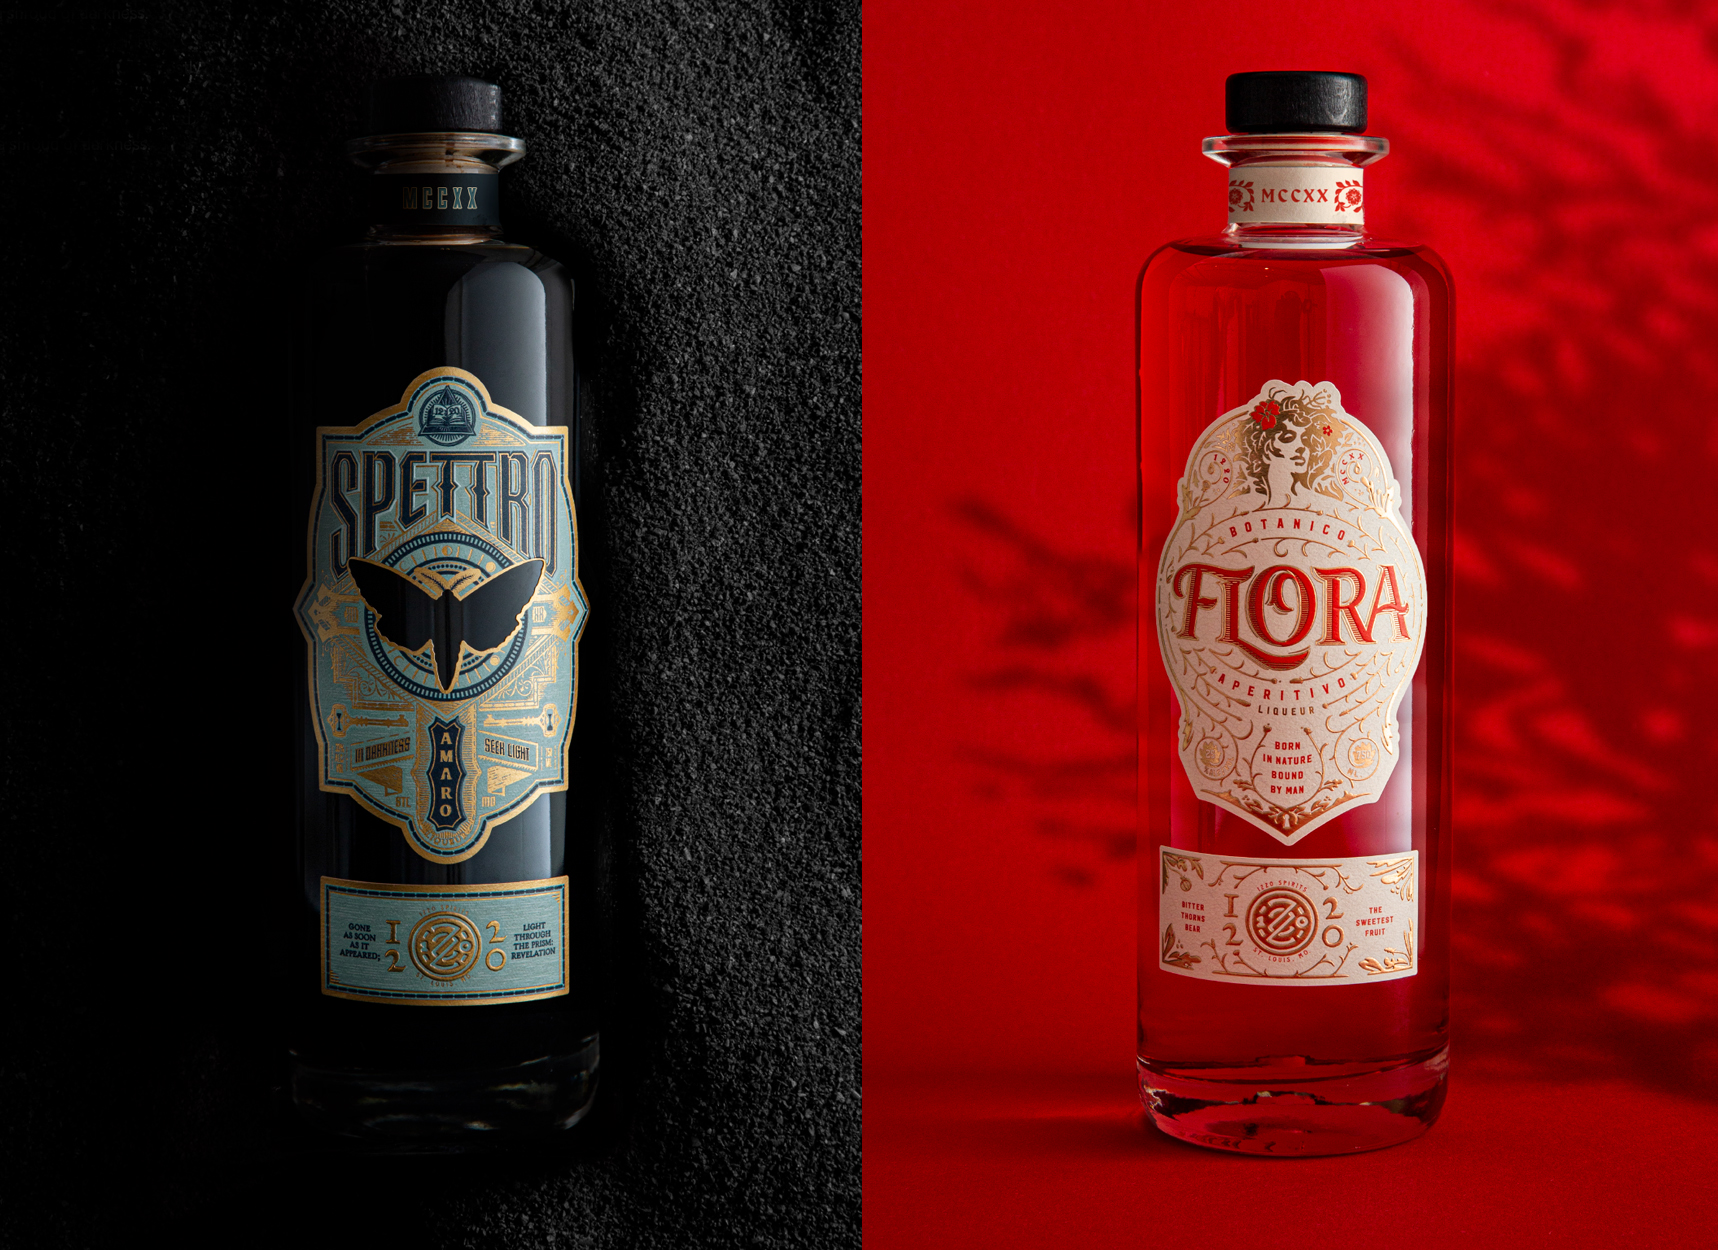 Spettro and Flora Bottles